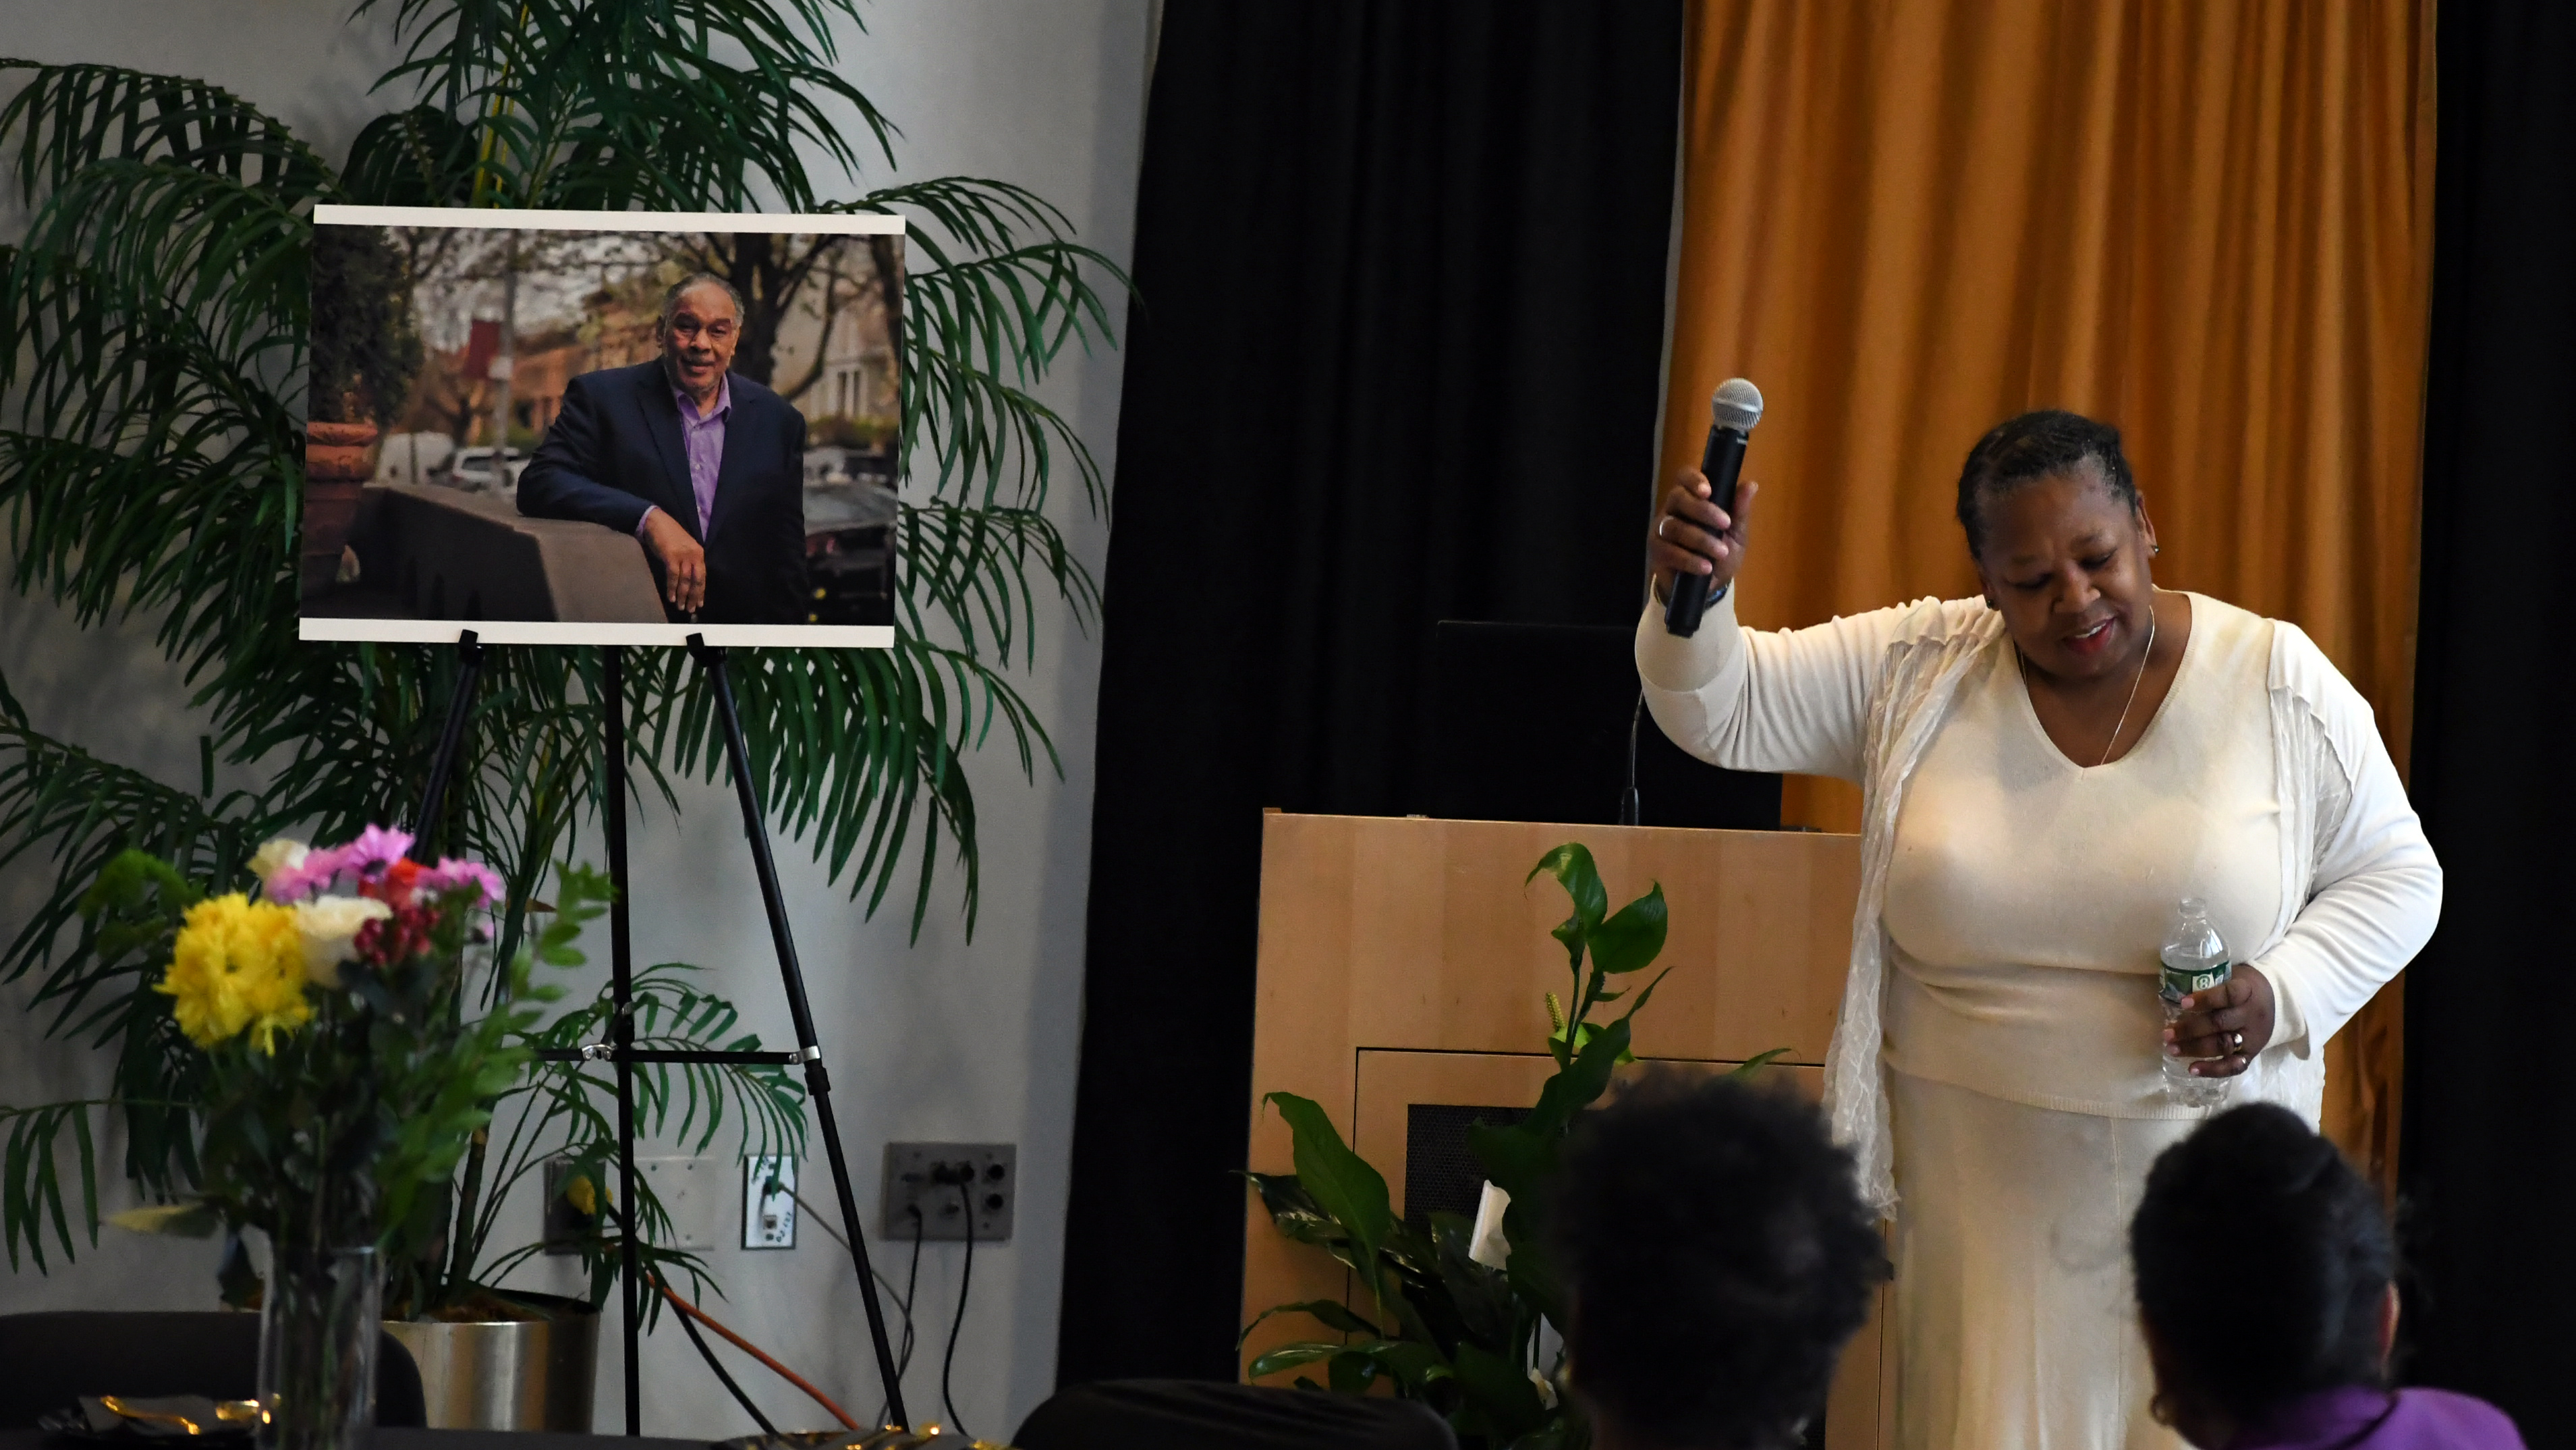 Esmeralda Simmons, a long-time colleague and friend at Medgar Evers College, performs a ceremony to honor Dr. John Flateau to kick off the repast at Medgar Evers College on January 10, 2024. (Photo by Nick Masuda/MEC)